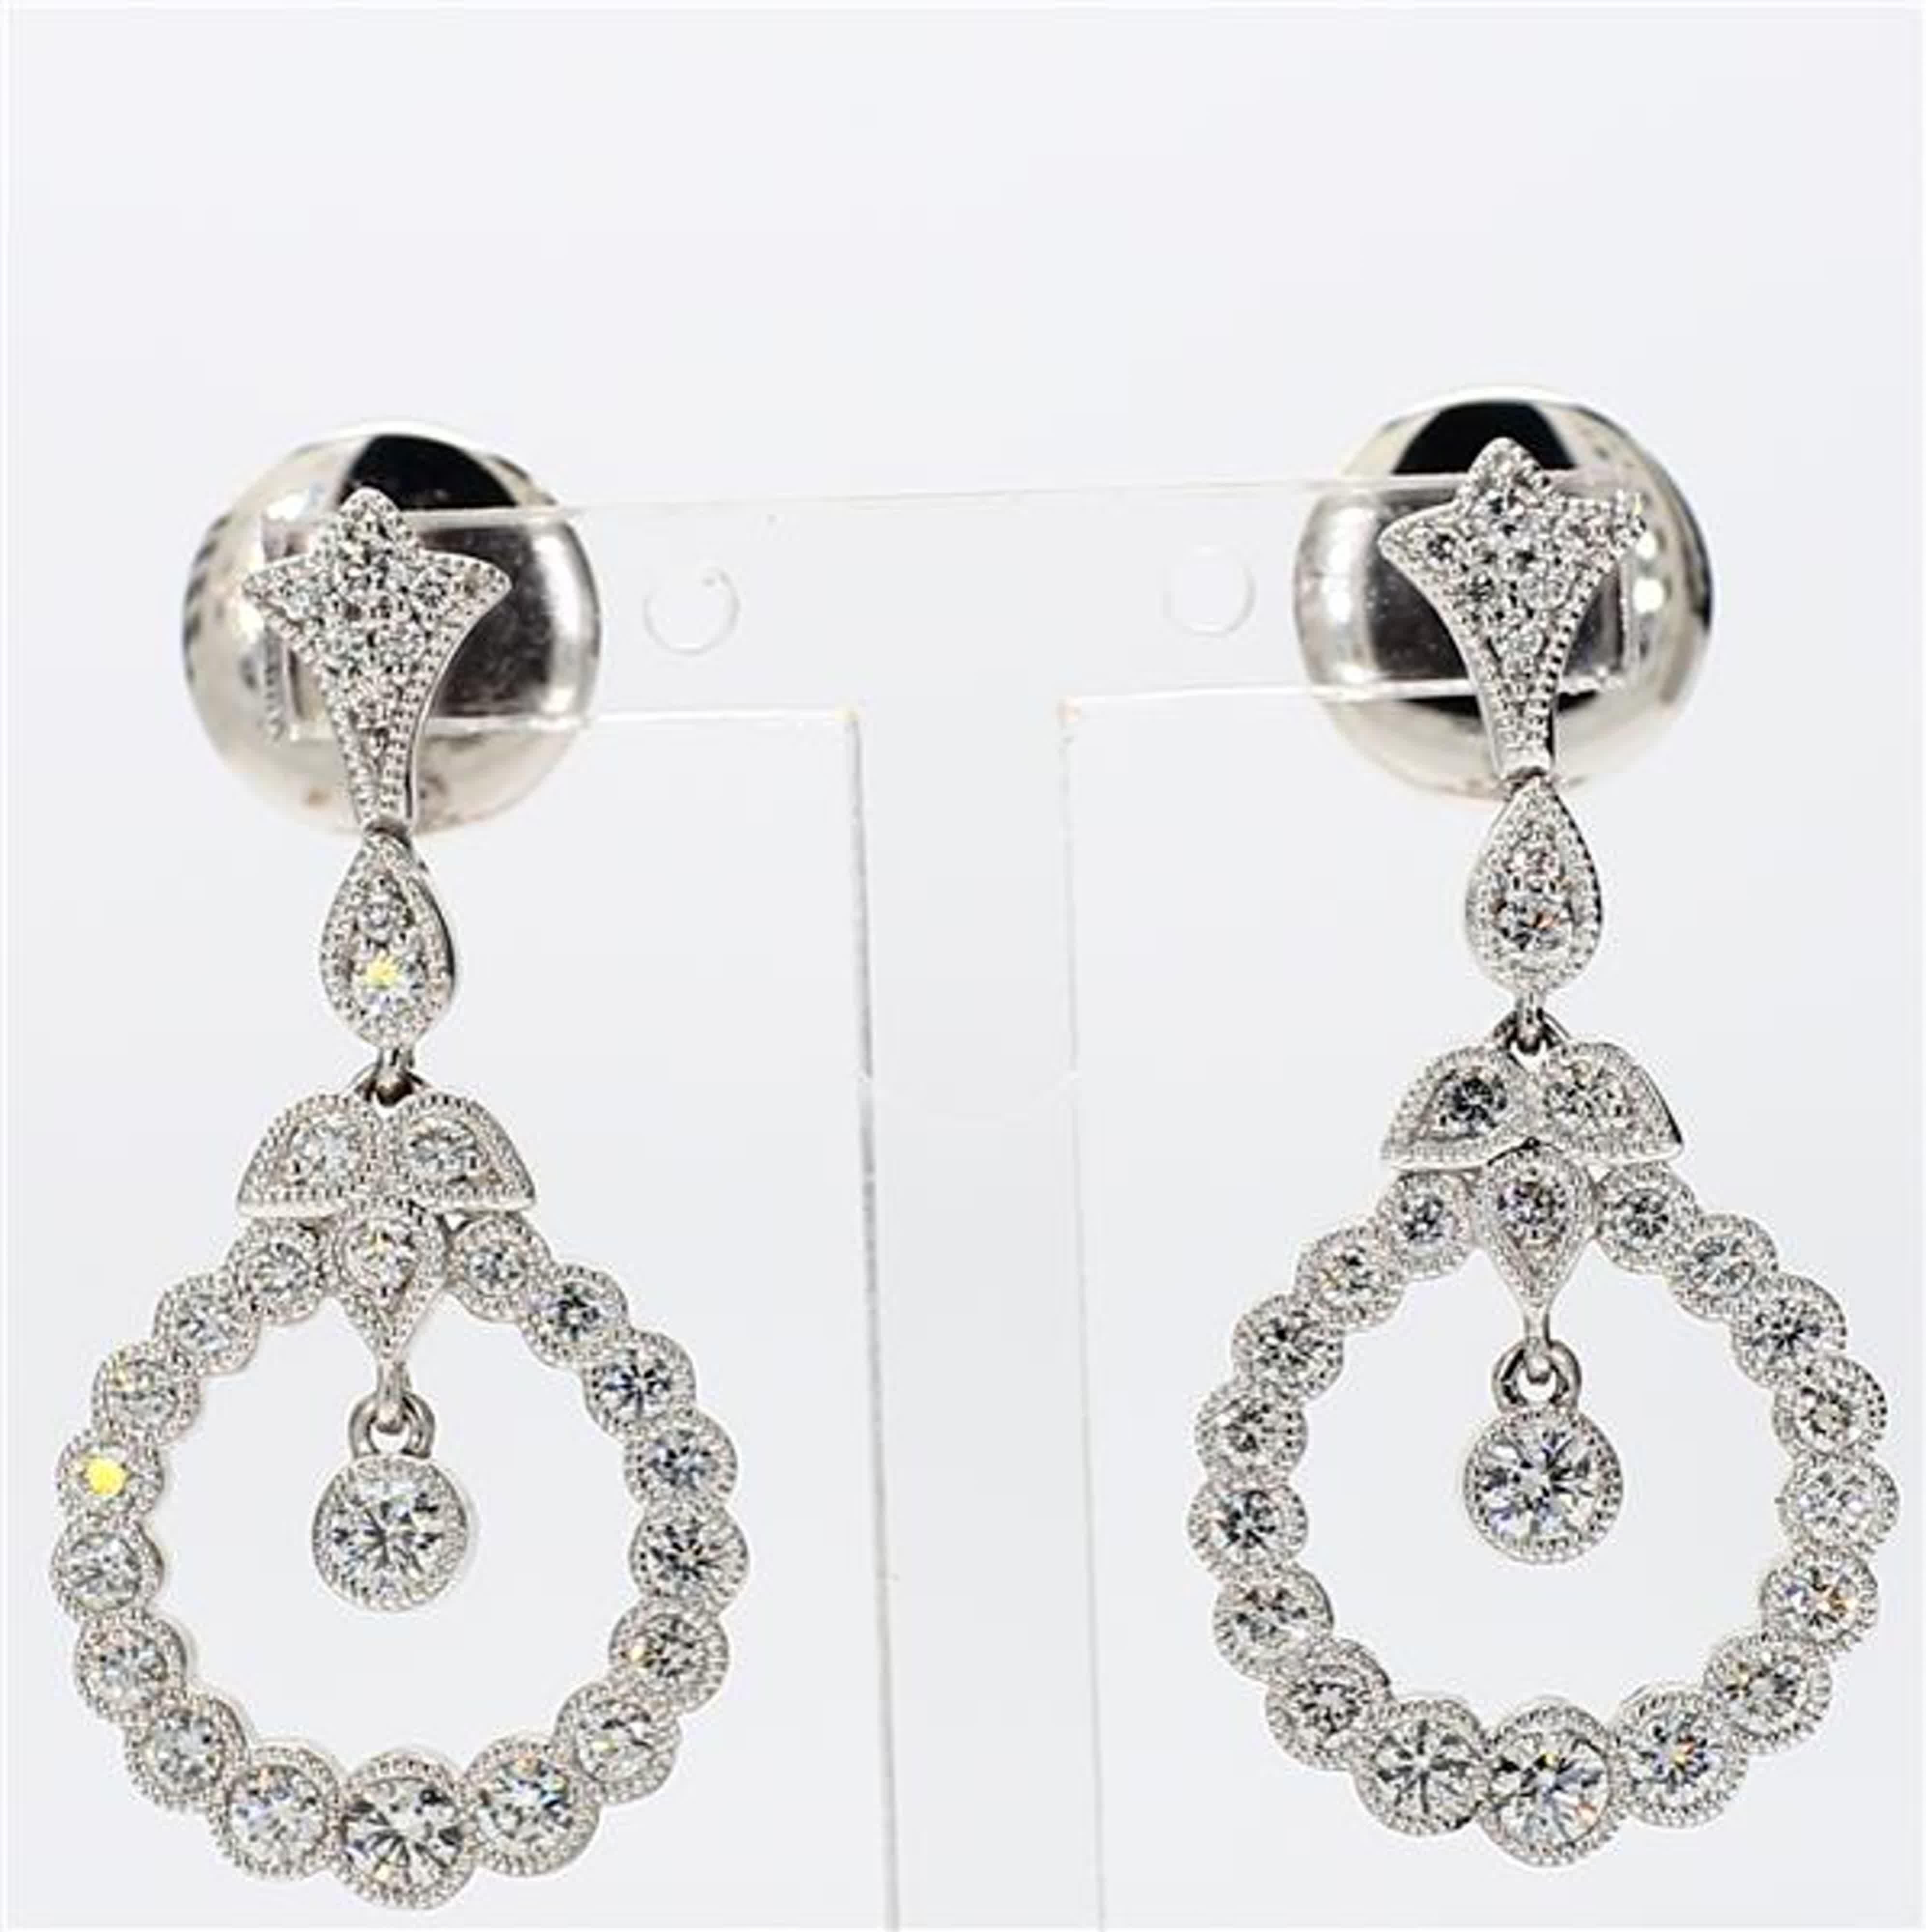 RareGemWorld's classic natural round cut white diamond earrings. Mounted in a beautiful 18K White Gold setting with natural round cut white diamond. These earrings are guaranteed to impress and enhance your personal collection!

Total Weight: